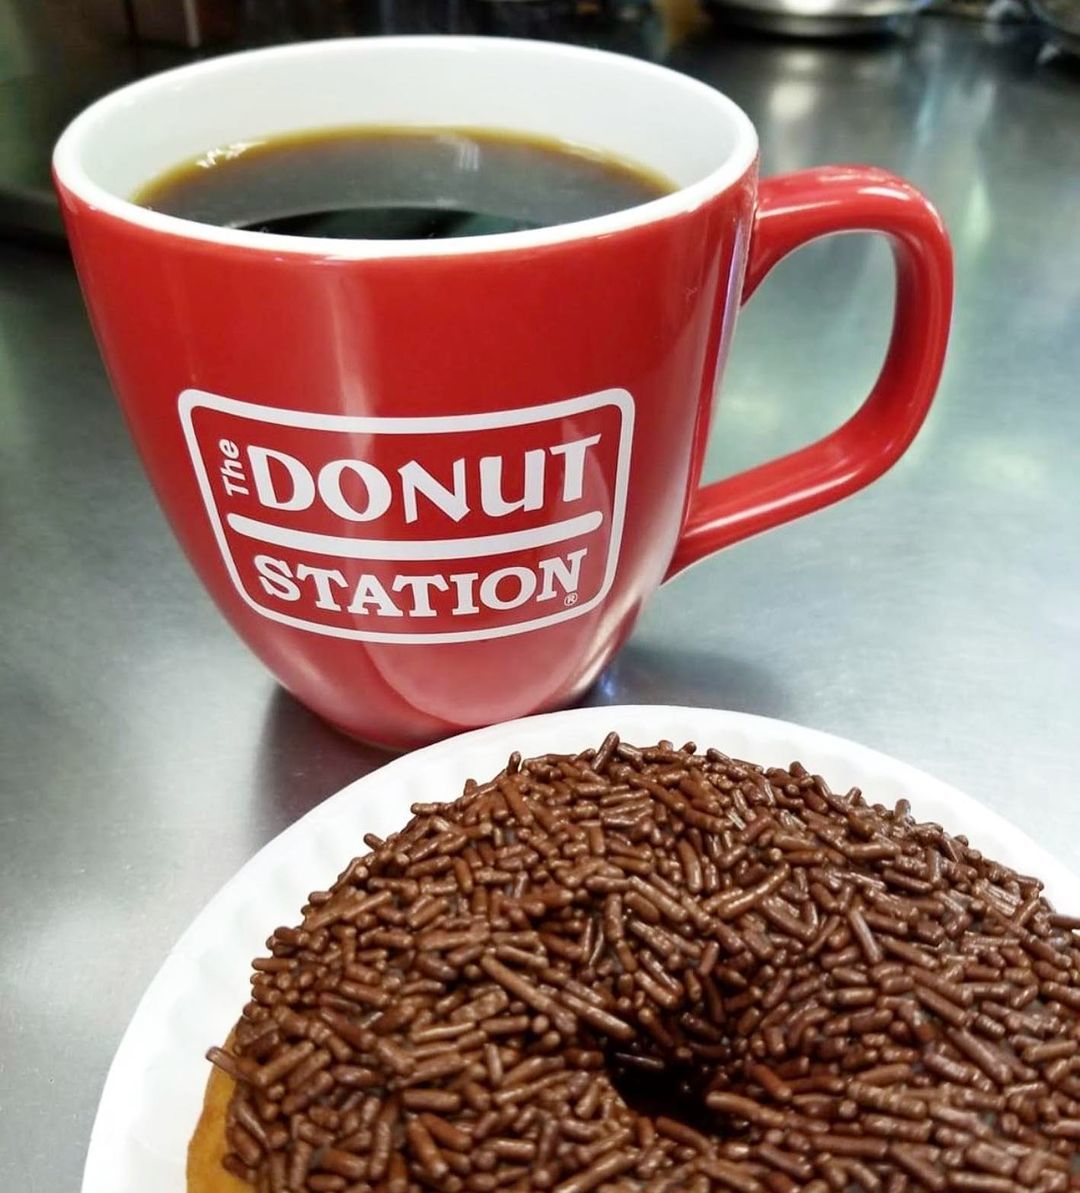 Start your morning the right way with a donut and a cup of coffee from The Donut Station! 🍩 What's your favorite donut?

📷: @thedonutstation
#TheDonutStation #CTFoodie #GlastonburyEats #GlastonburyCT #EatLocal